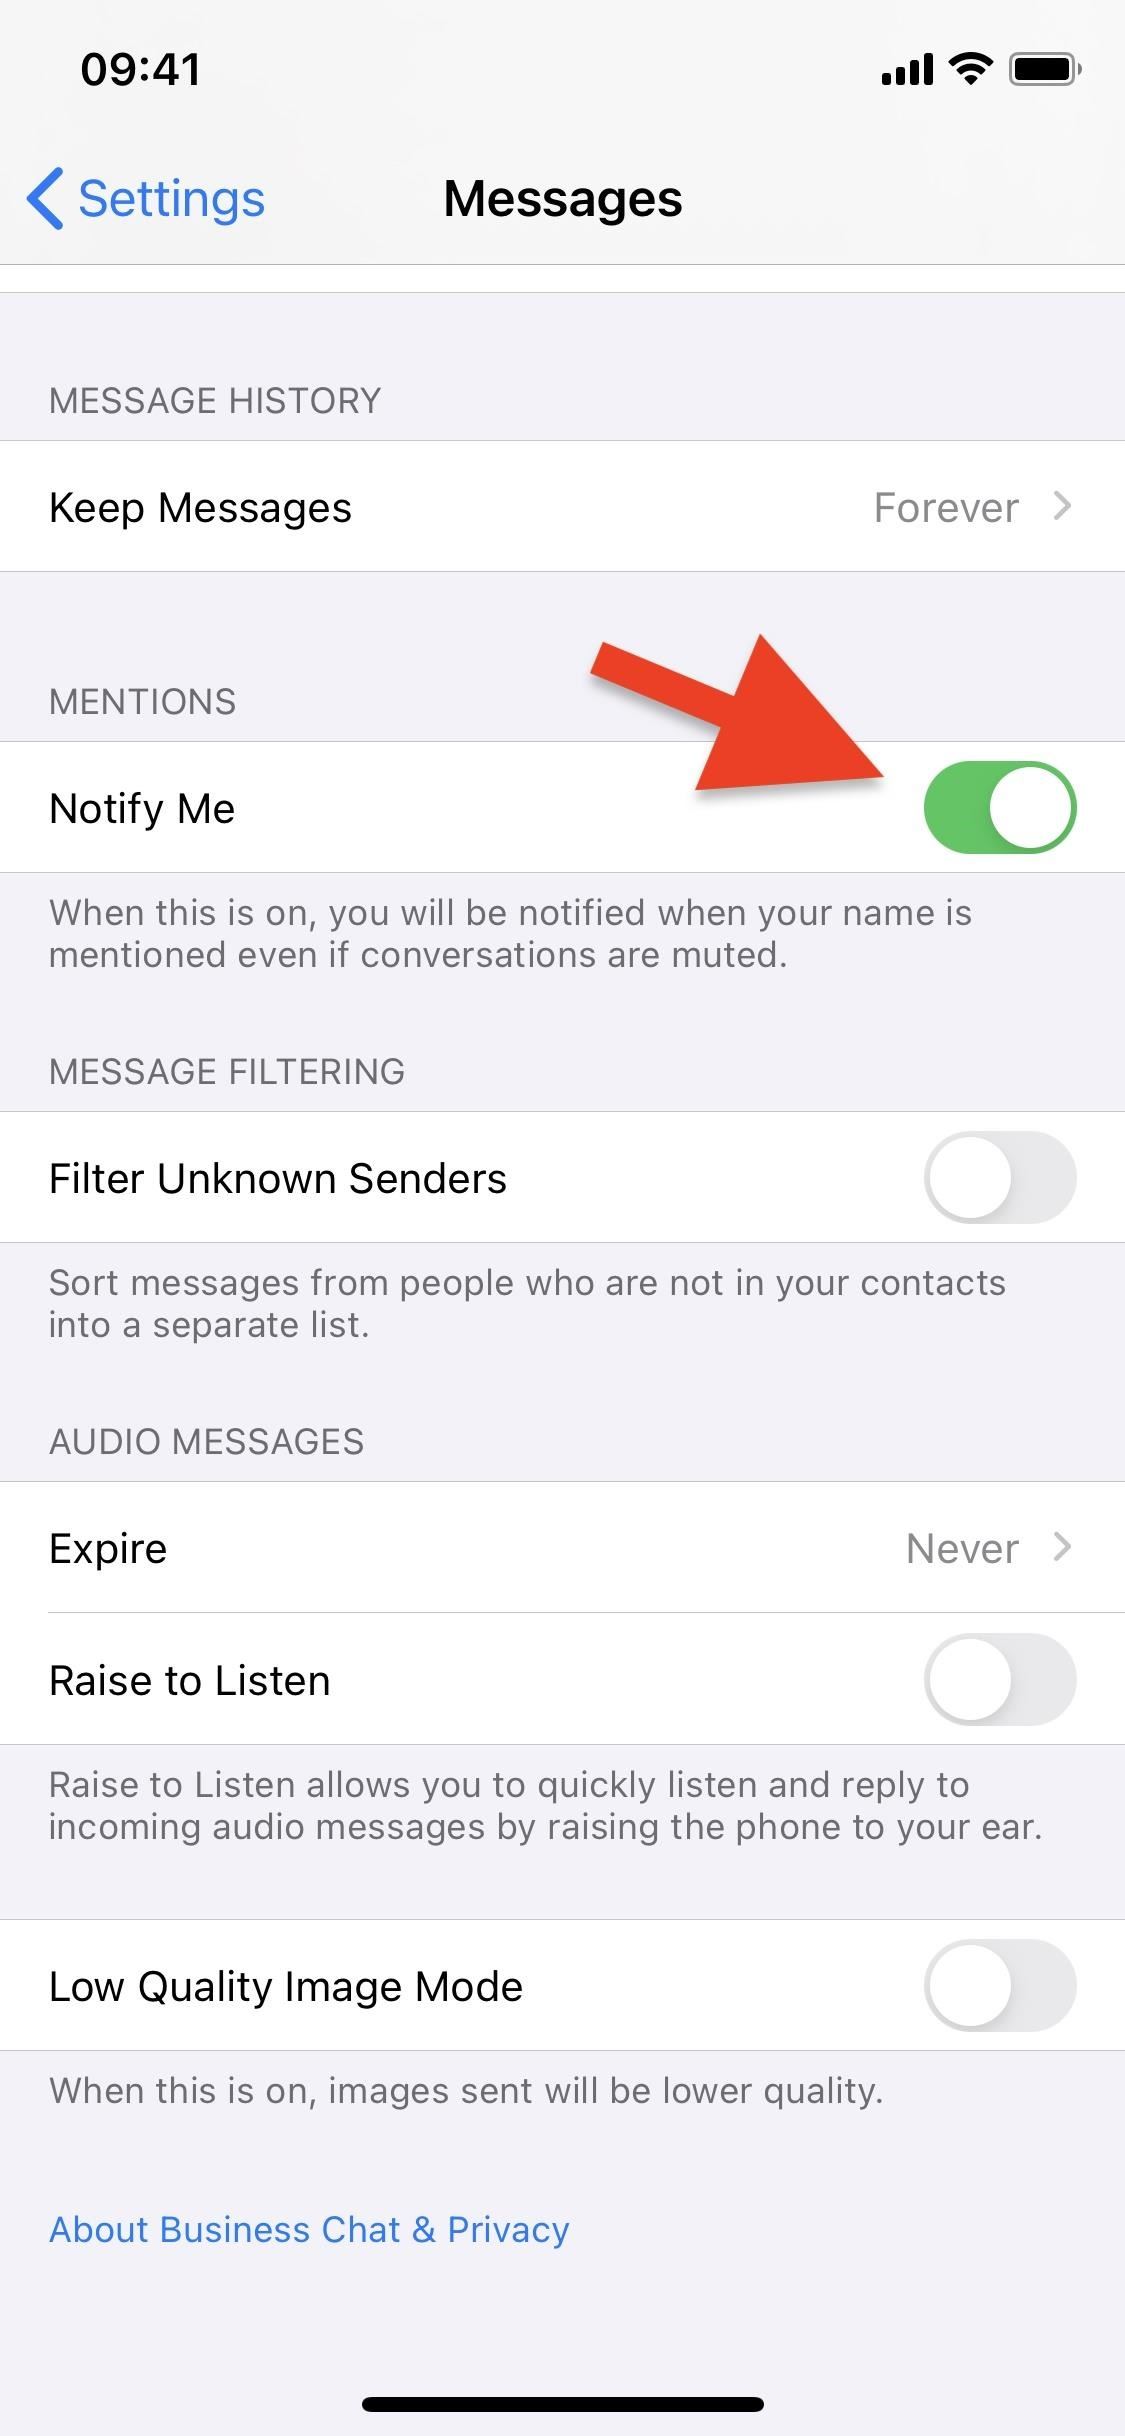 How to Get Notifications for Messages You're Mentioned in Only on Your iPhone